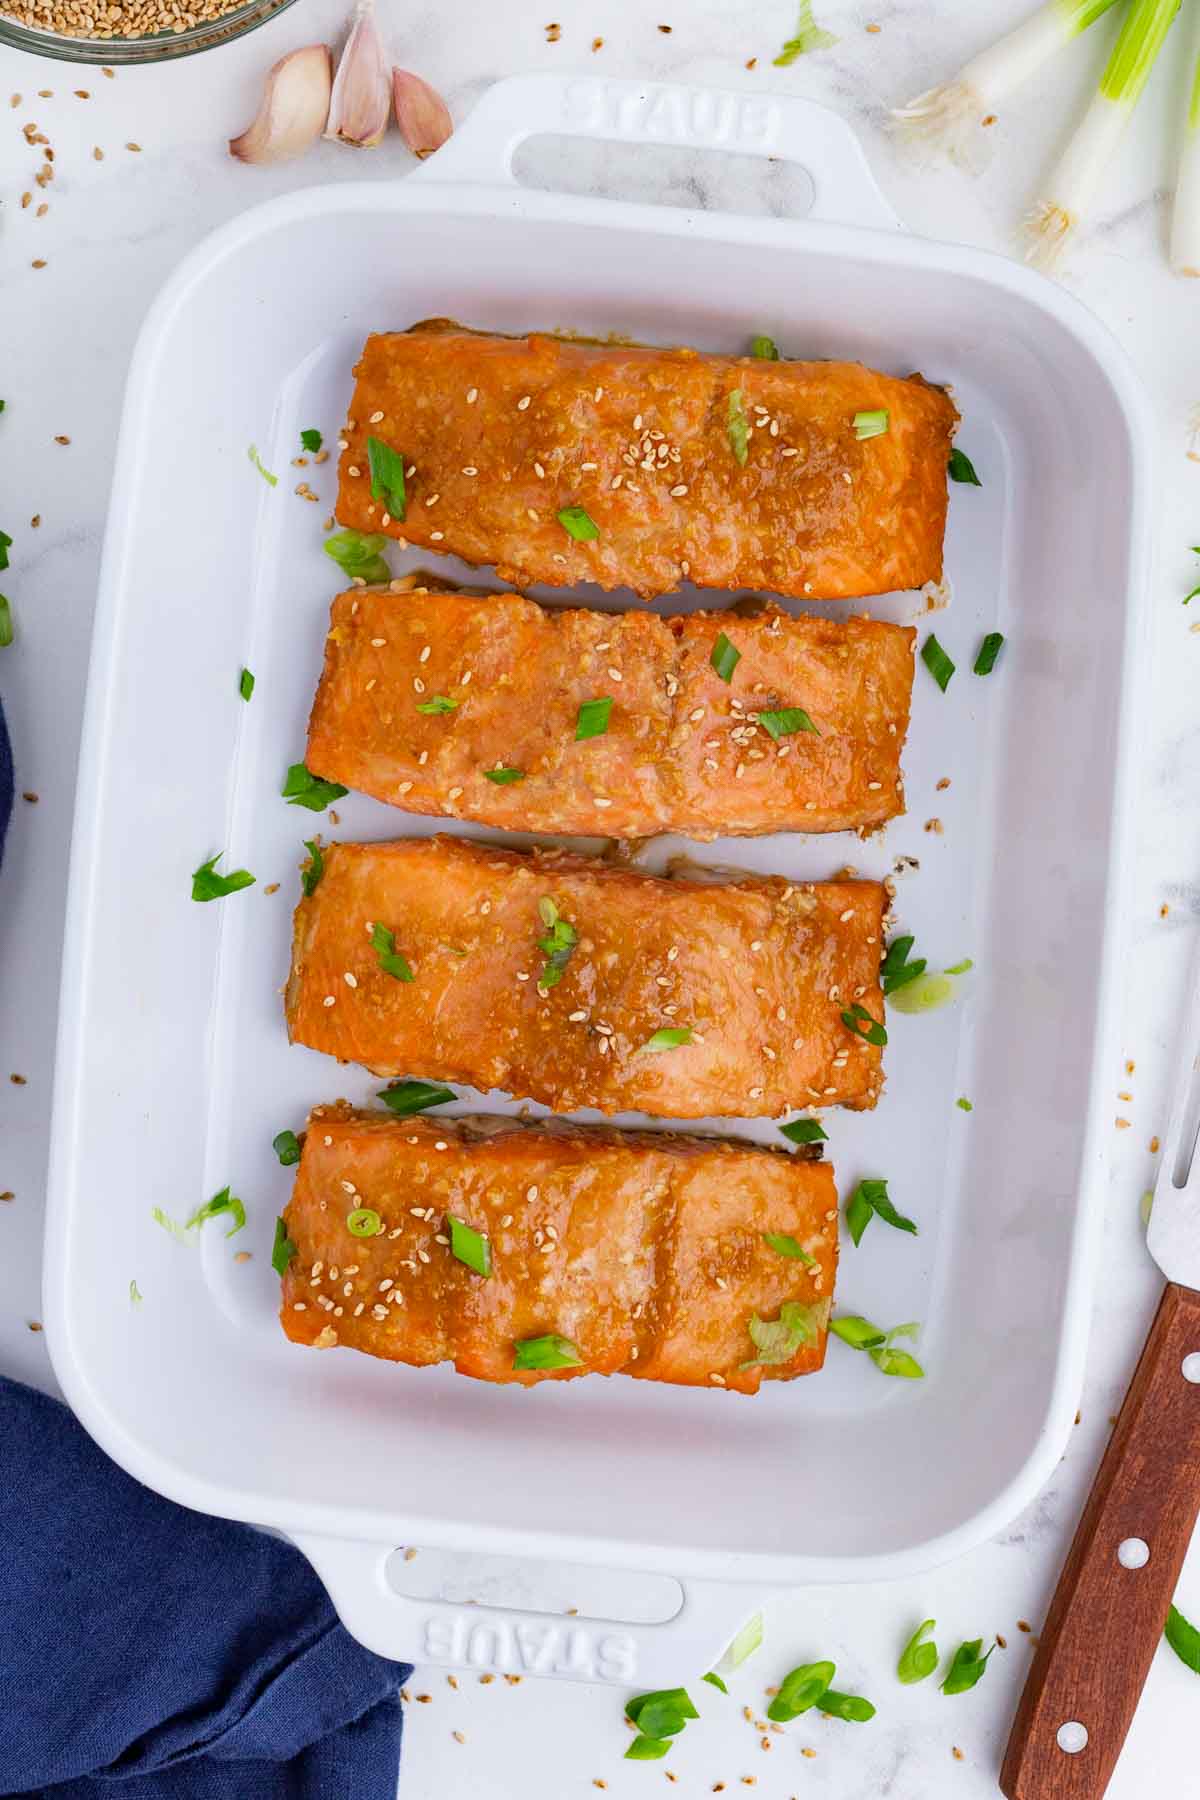 Miso glazed salmon is baked in the oven.